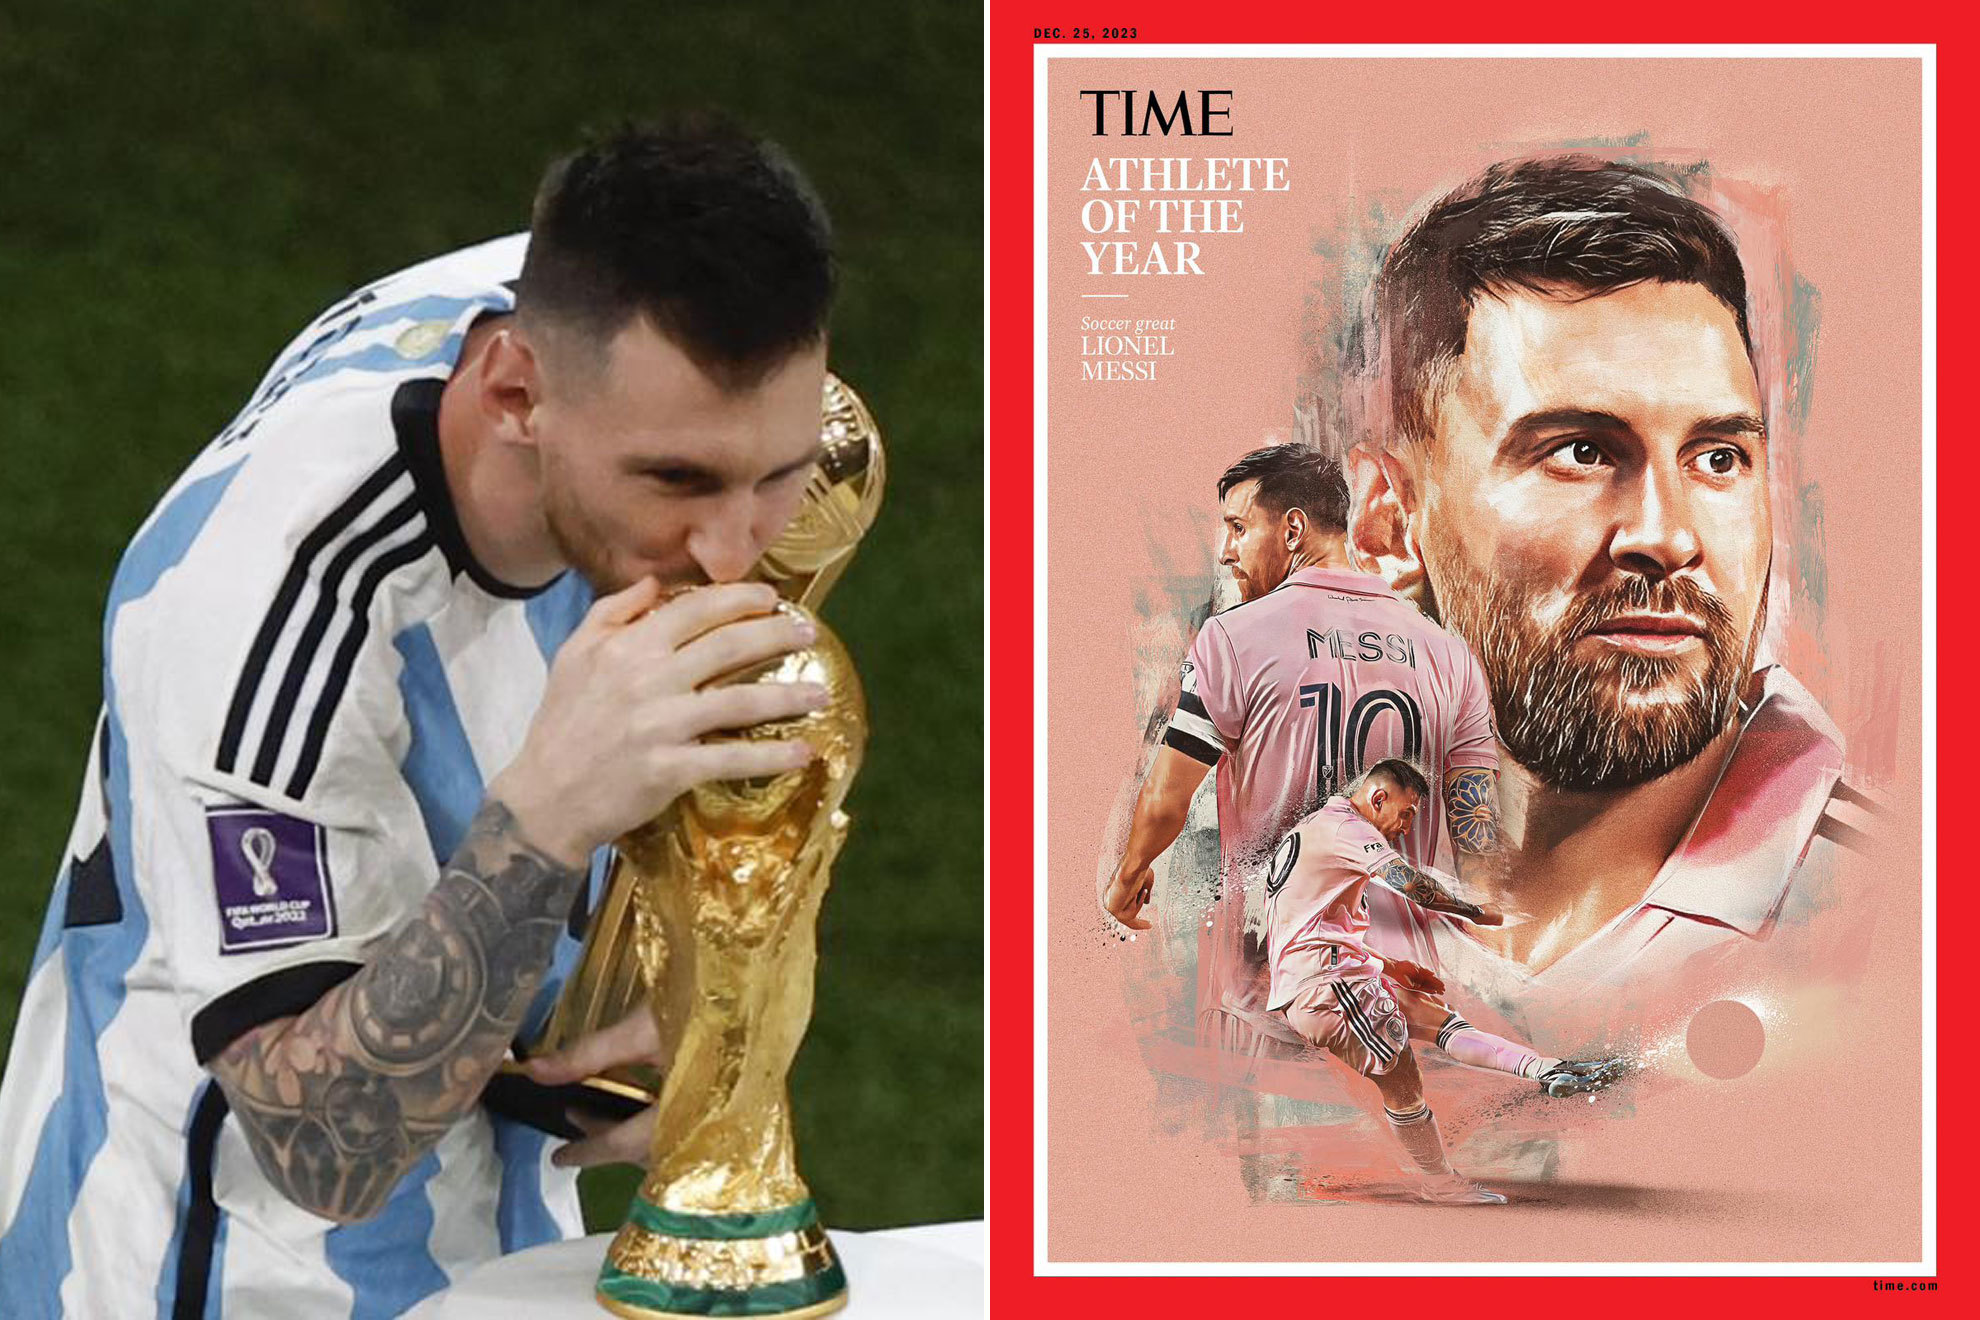 LeoMessi and the TIME Magazine cover